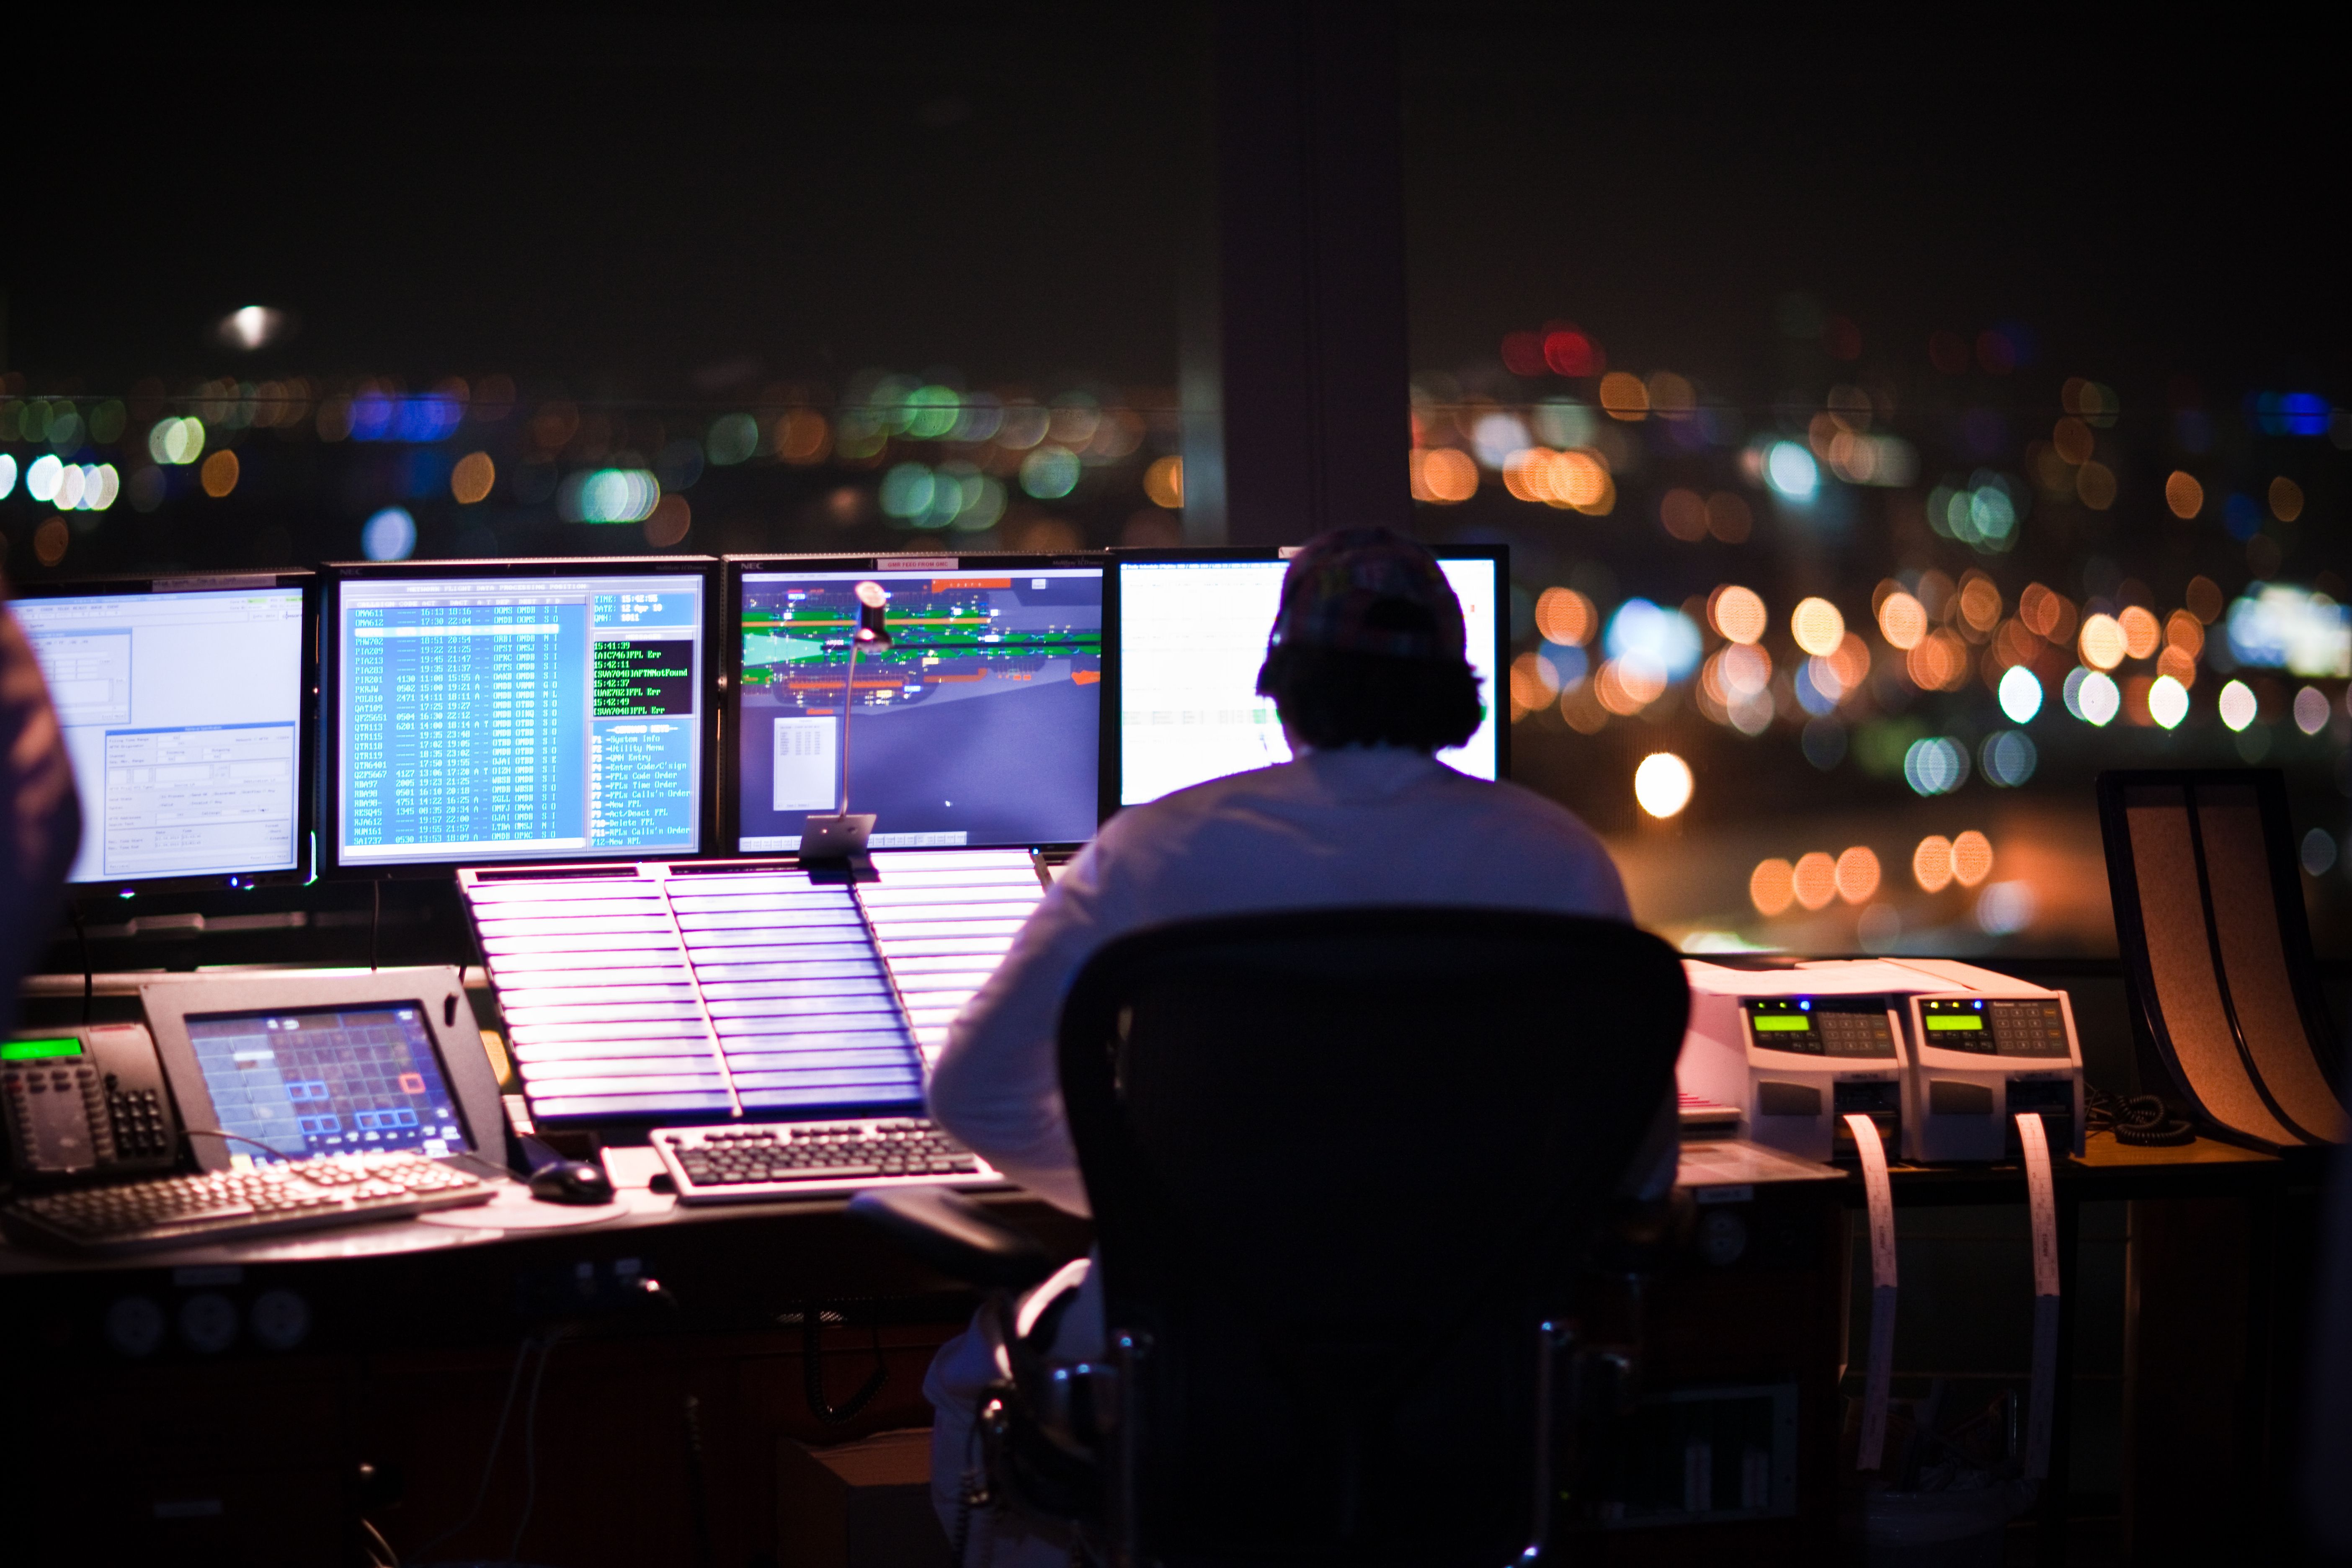 An air traffic controller working at night